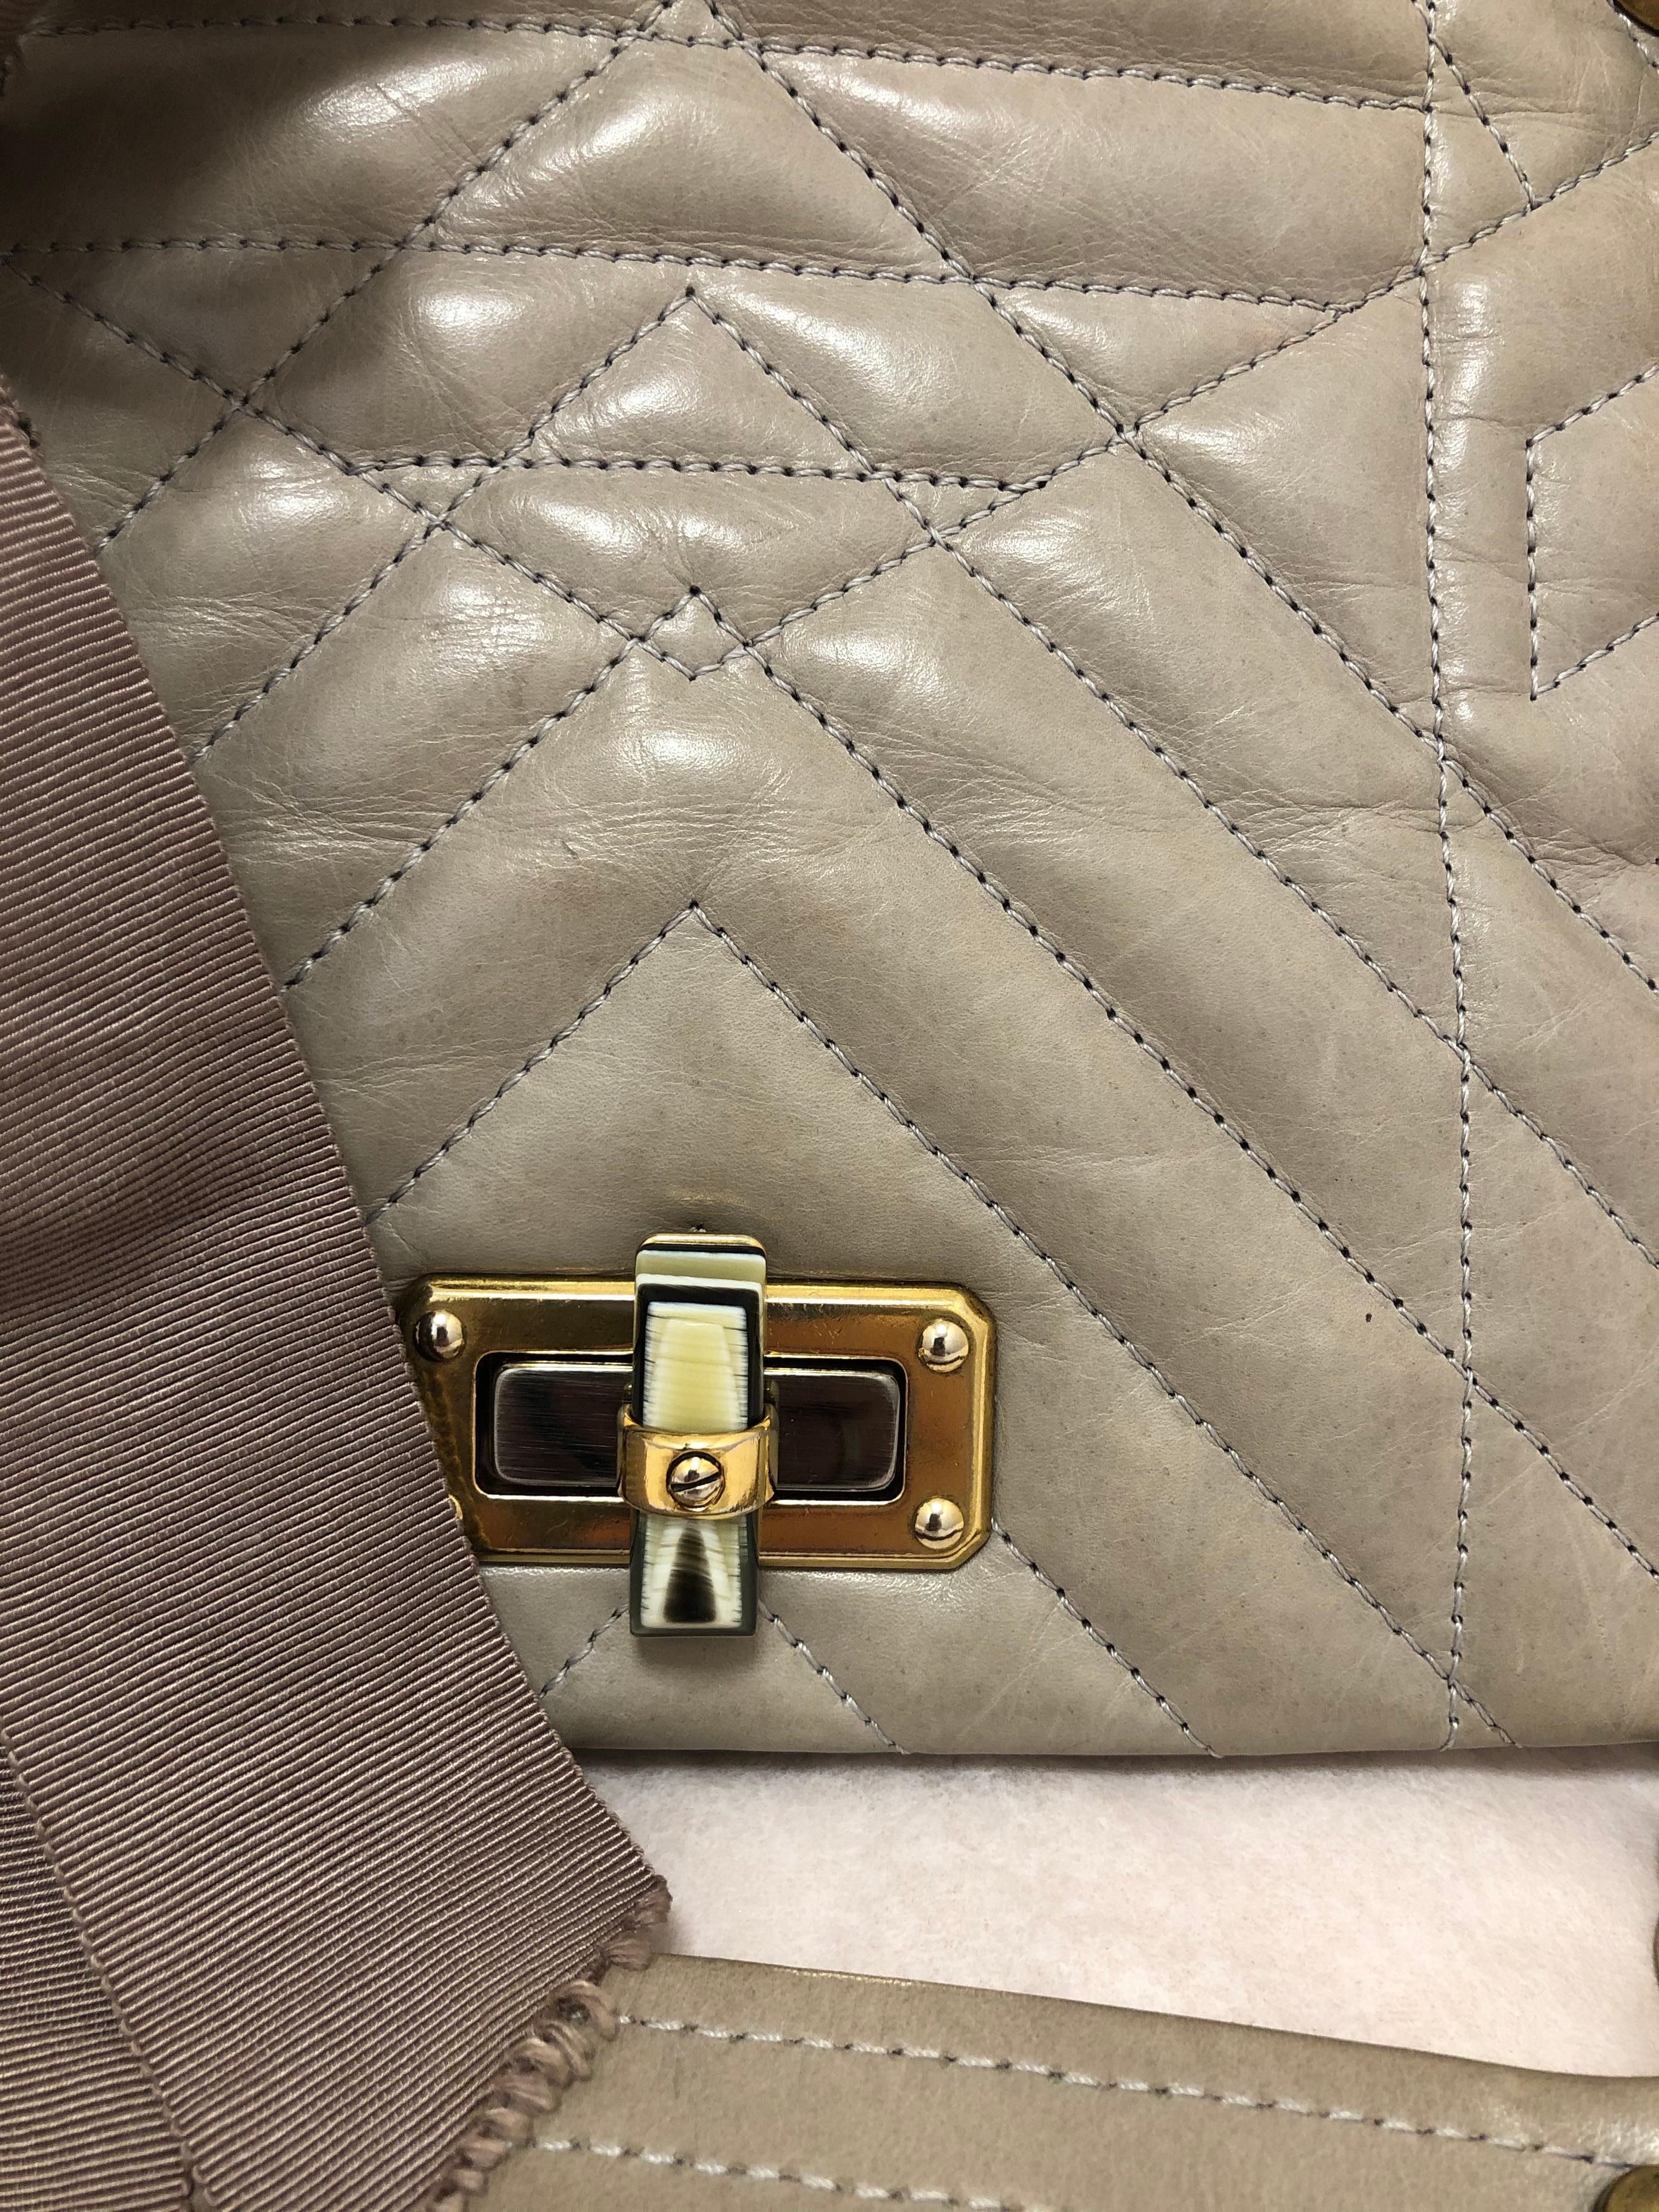 This Lanvin bag is a great contemporary every day bag, crafted from a buttery sof lambskin chevron quilted leather. The Happy bag features a turn-lock closure on the front flap, and a spacious fabric lined interior, with a zipped leather pocket on